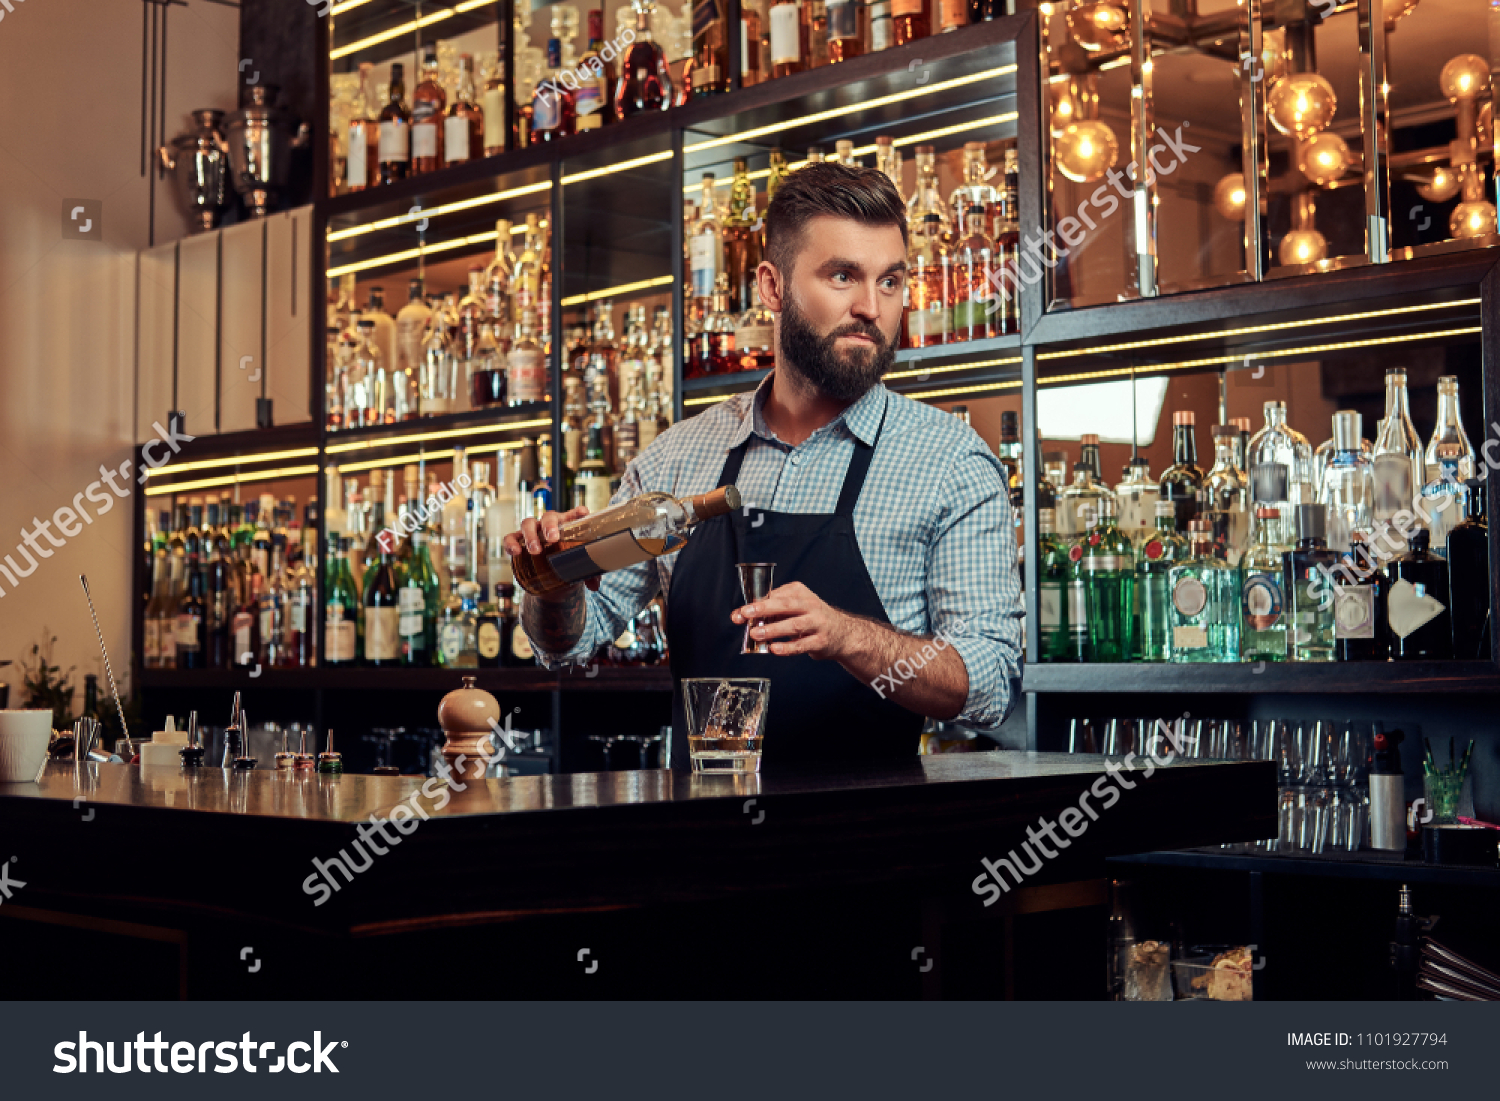 Stylish brutal barman in a shirt and apron makes a cocktail at bar counter background. #1101927794